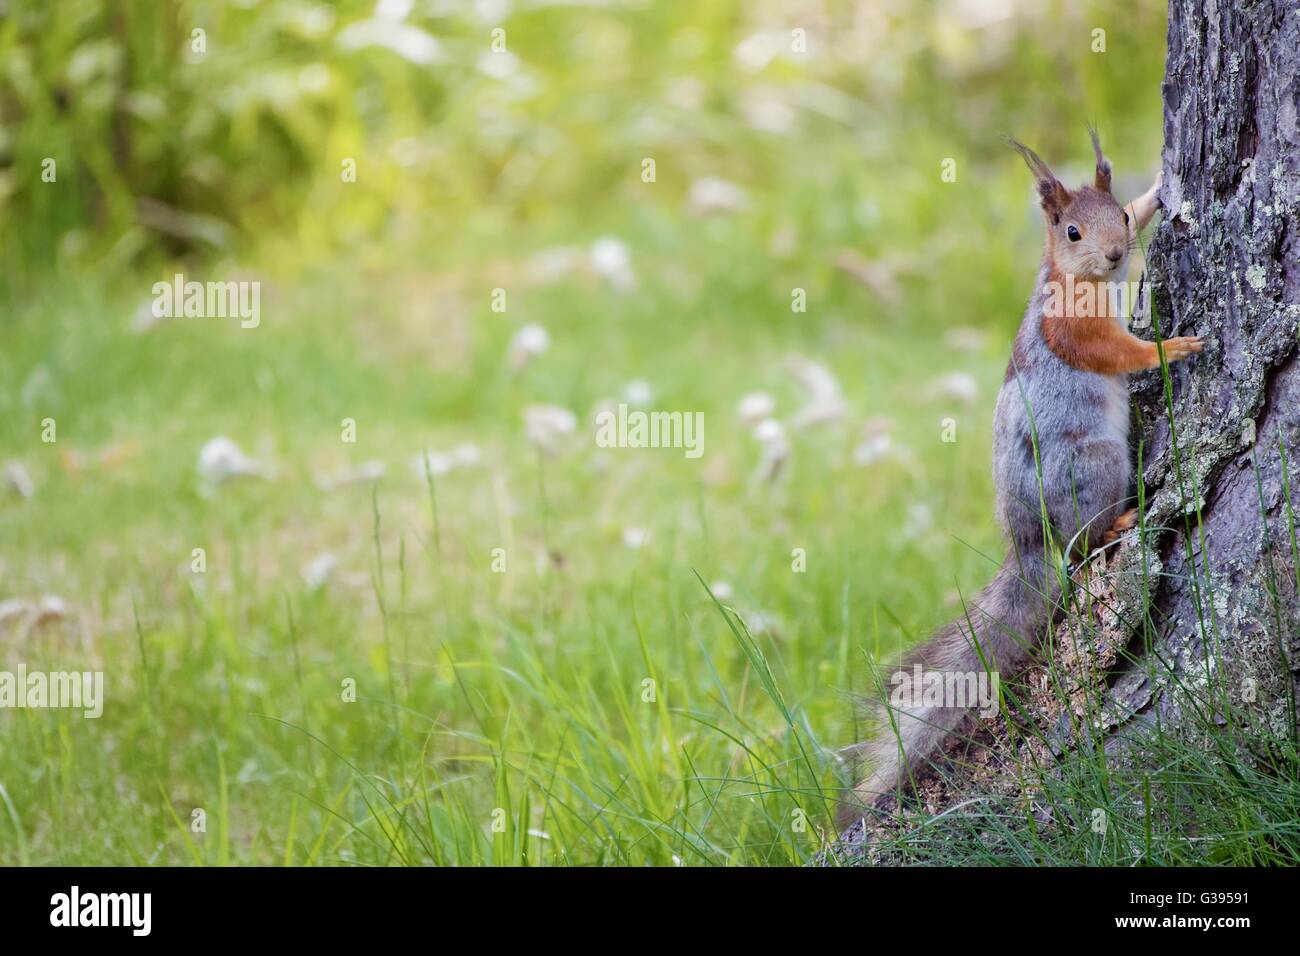 Small squirrel on the ground at summer. Warm green colors and blurred background. A wallpaper type image with lots of negative space. Stock Photo